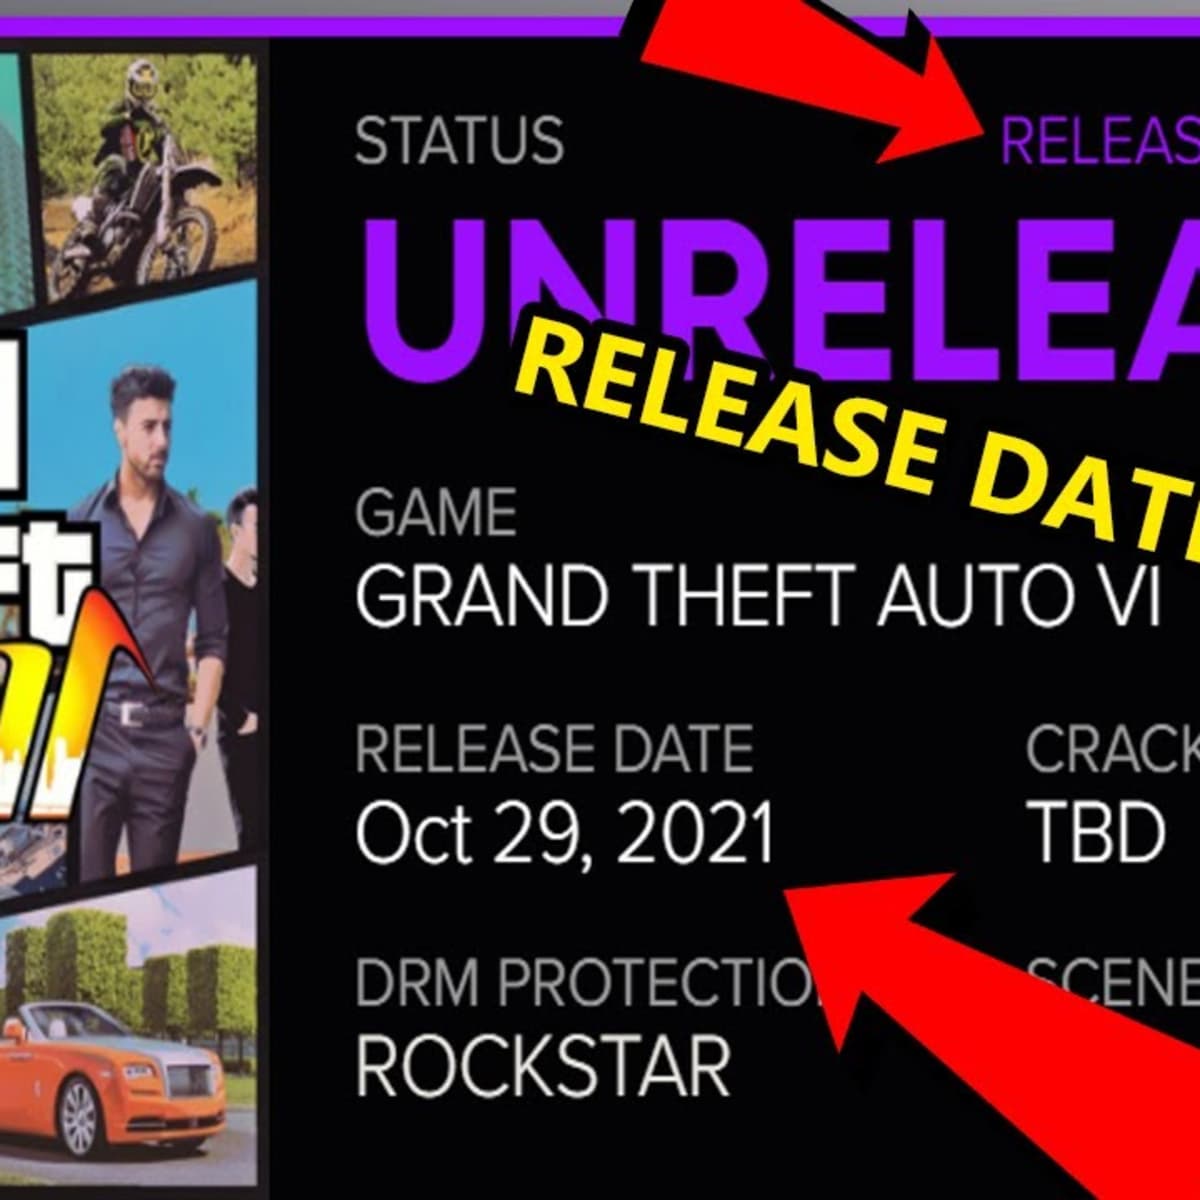 Sleuth believes he's found Grand Theft Auto VI release date